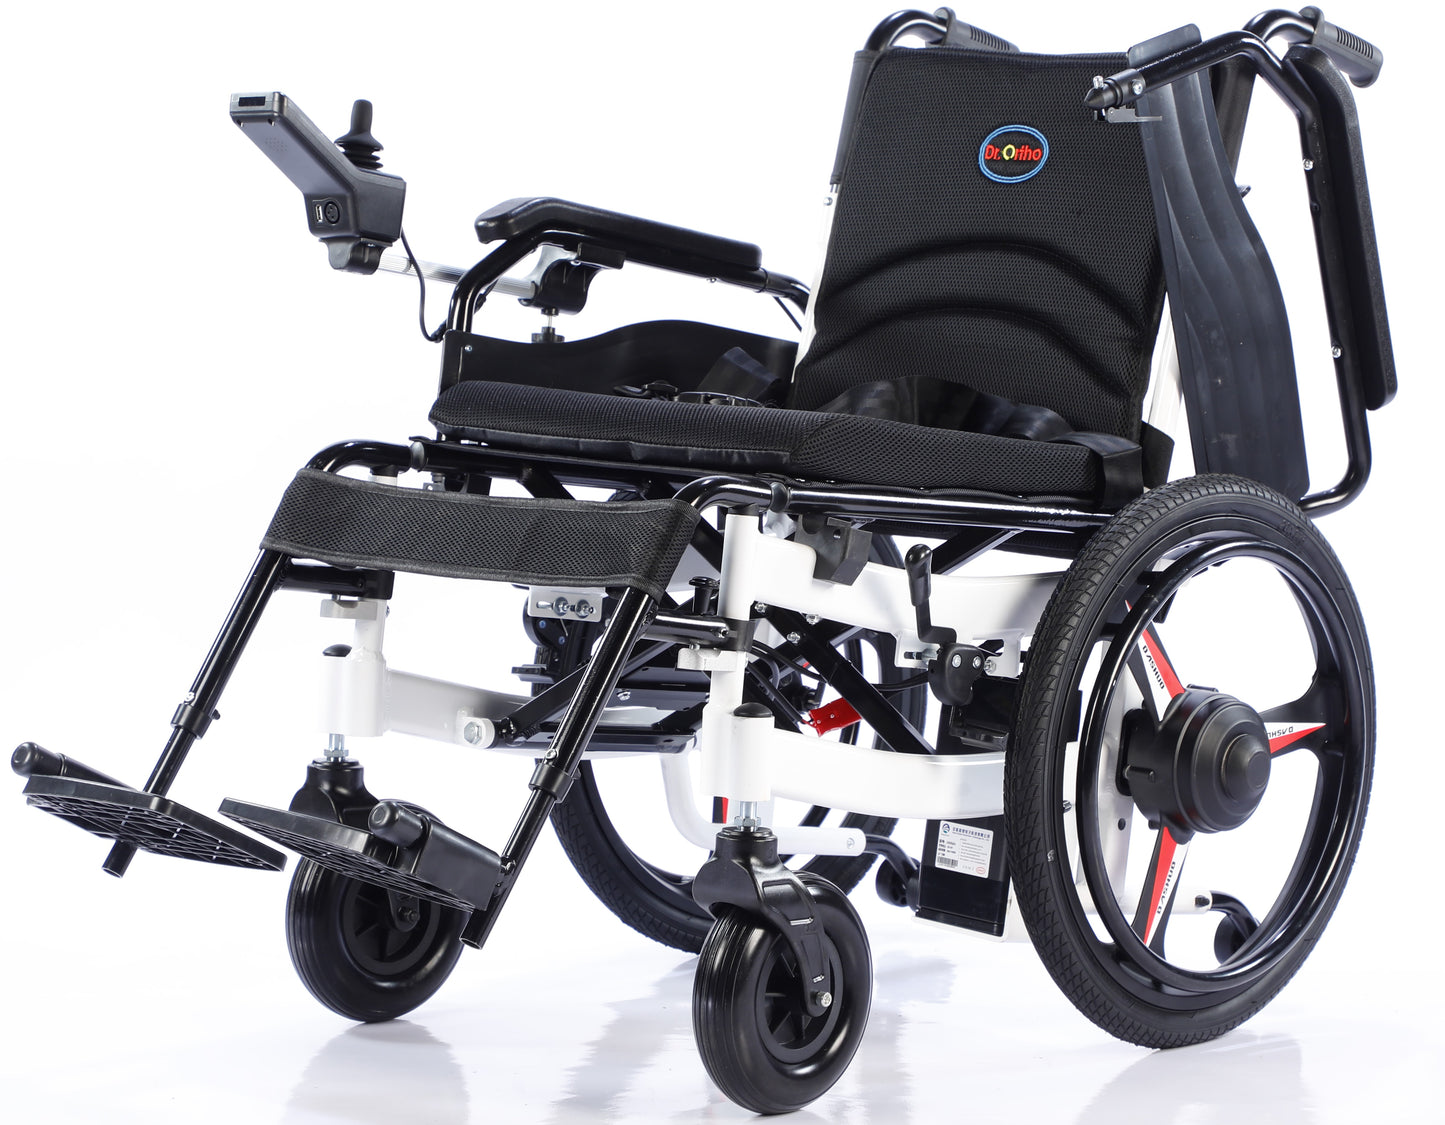 Dr.Ortho electric wheelchair DR-N-20-C light weight aluminum frame with lithium battery and Large Rear Wheels